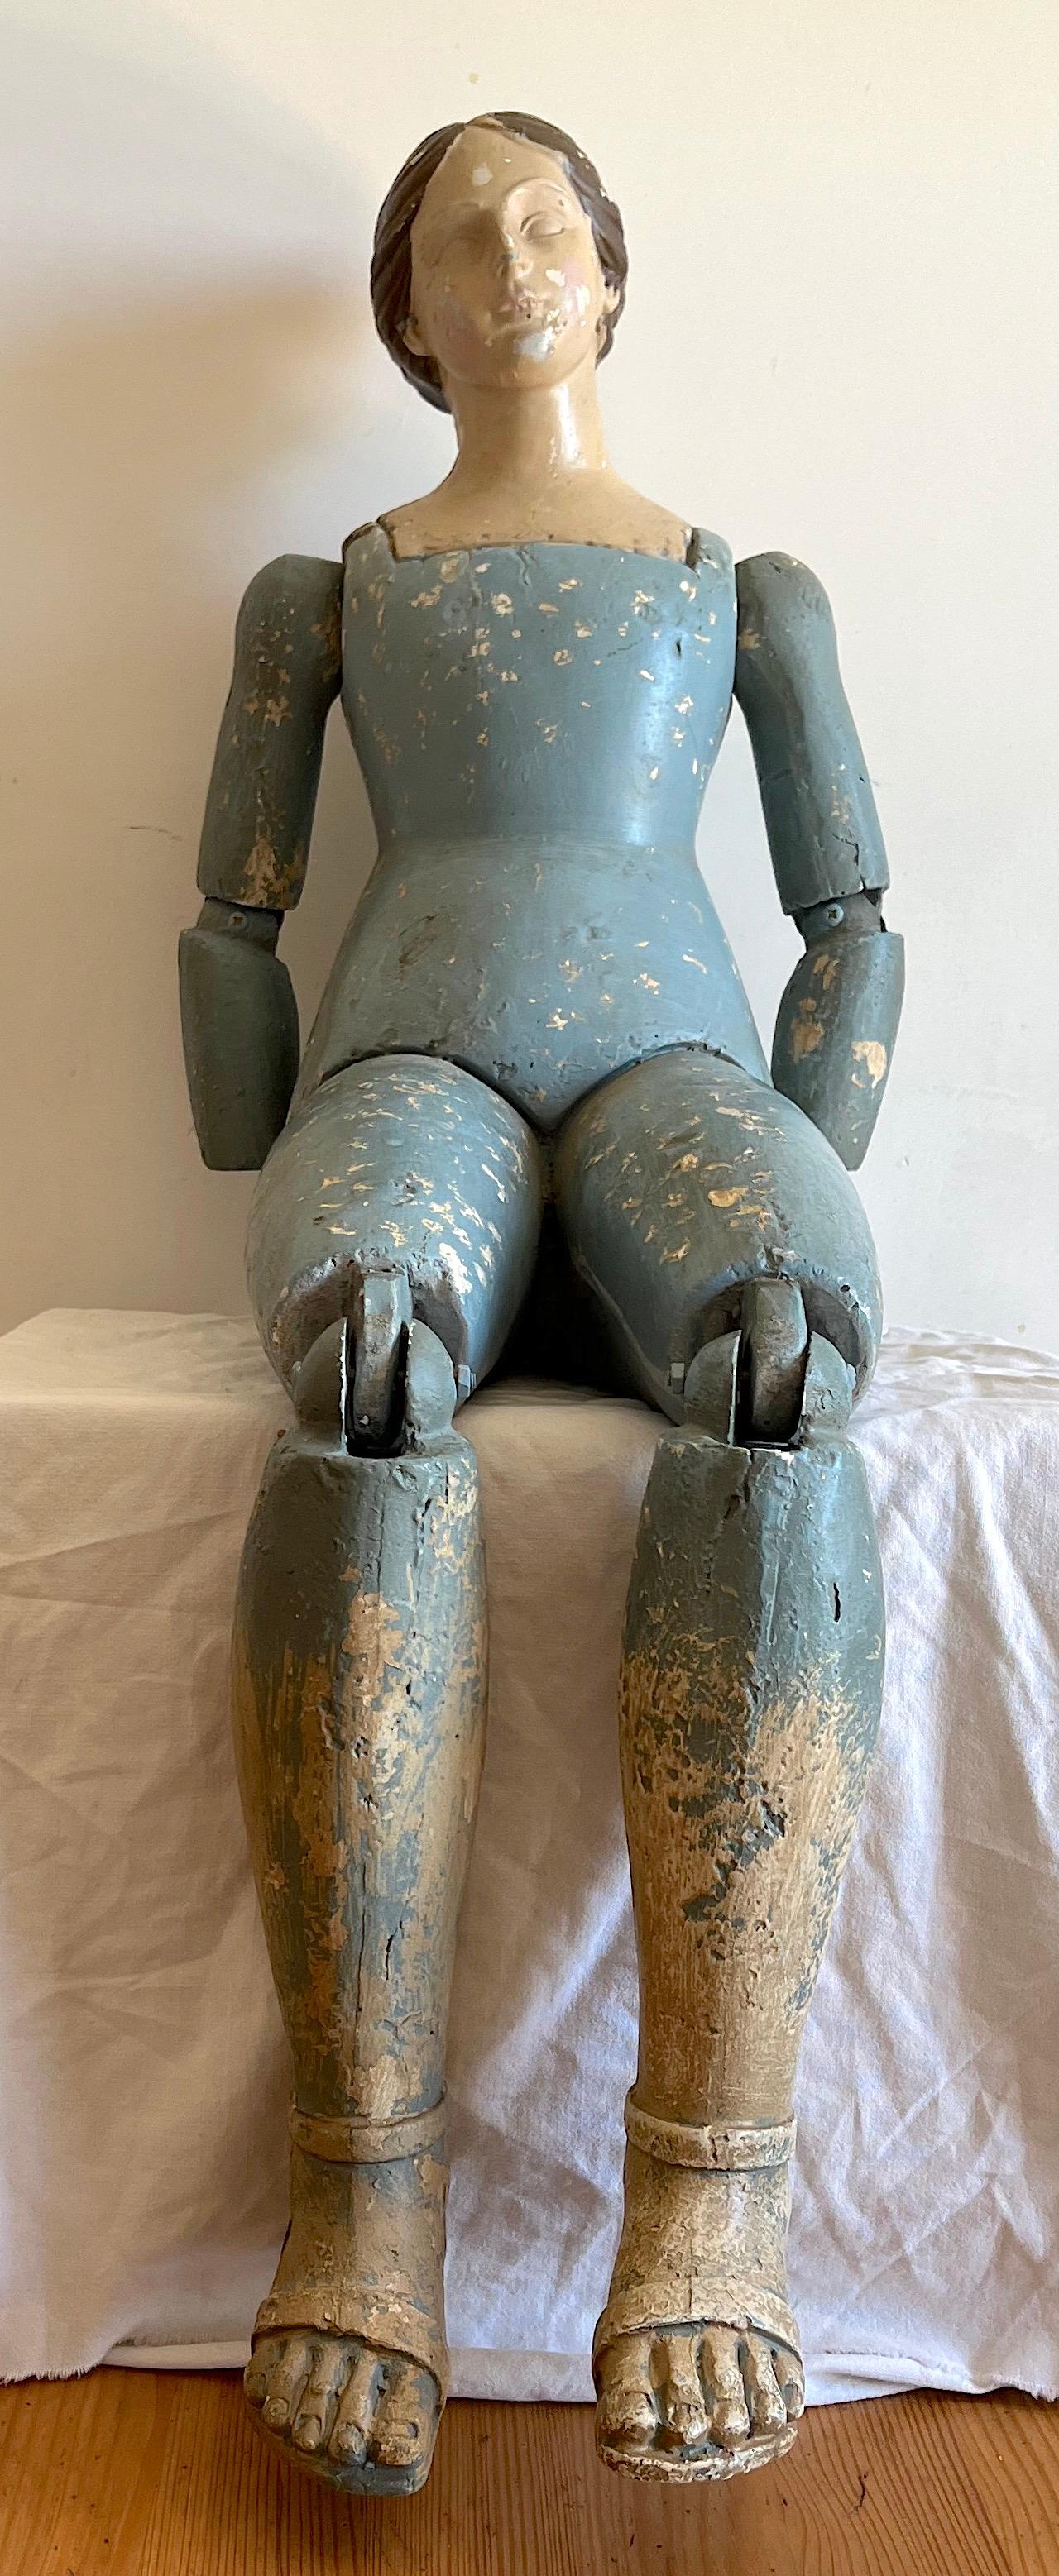 Seated female mannequin from the 1950s / 1960s, unrestored, with spectacular chromatic patina, functional joints, shoulders, legs and arms, made of plaster and wood.